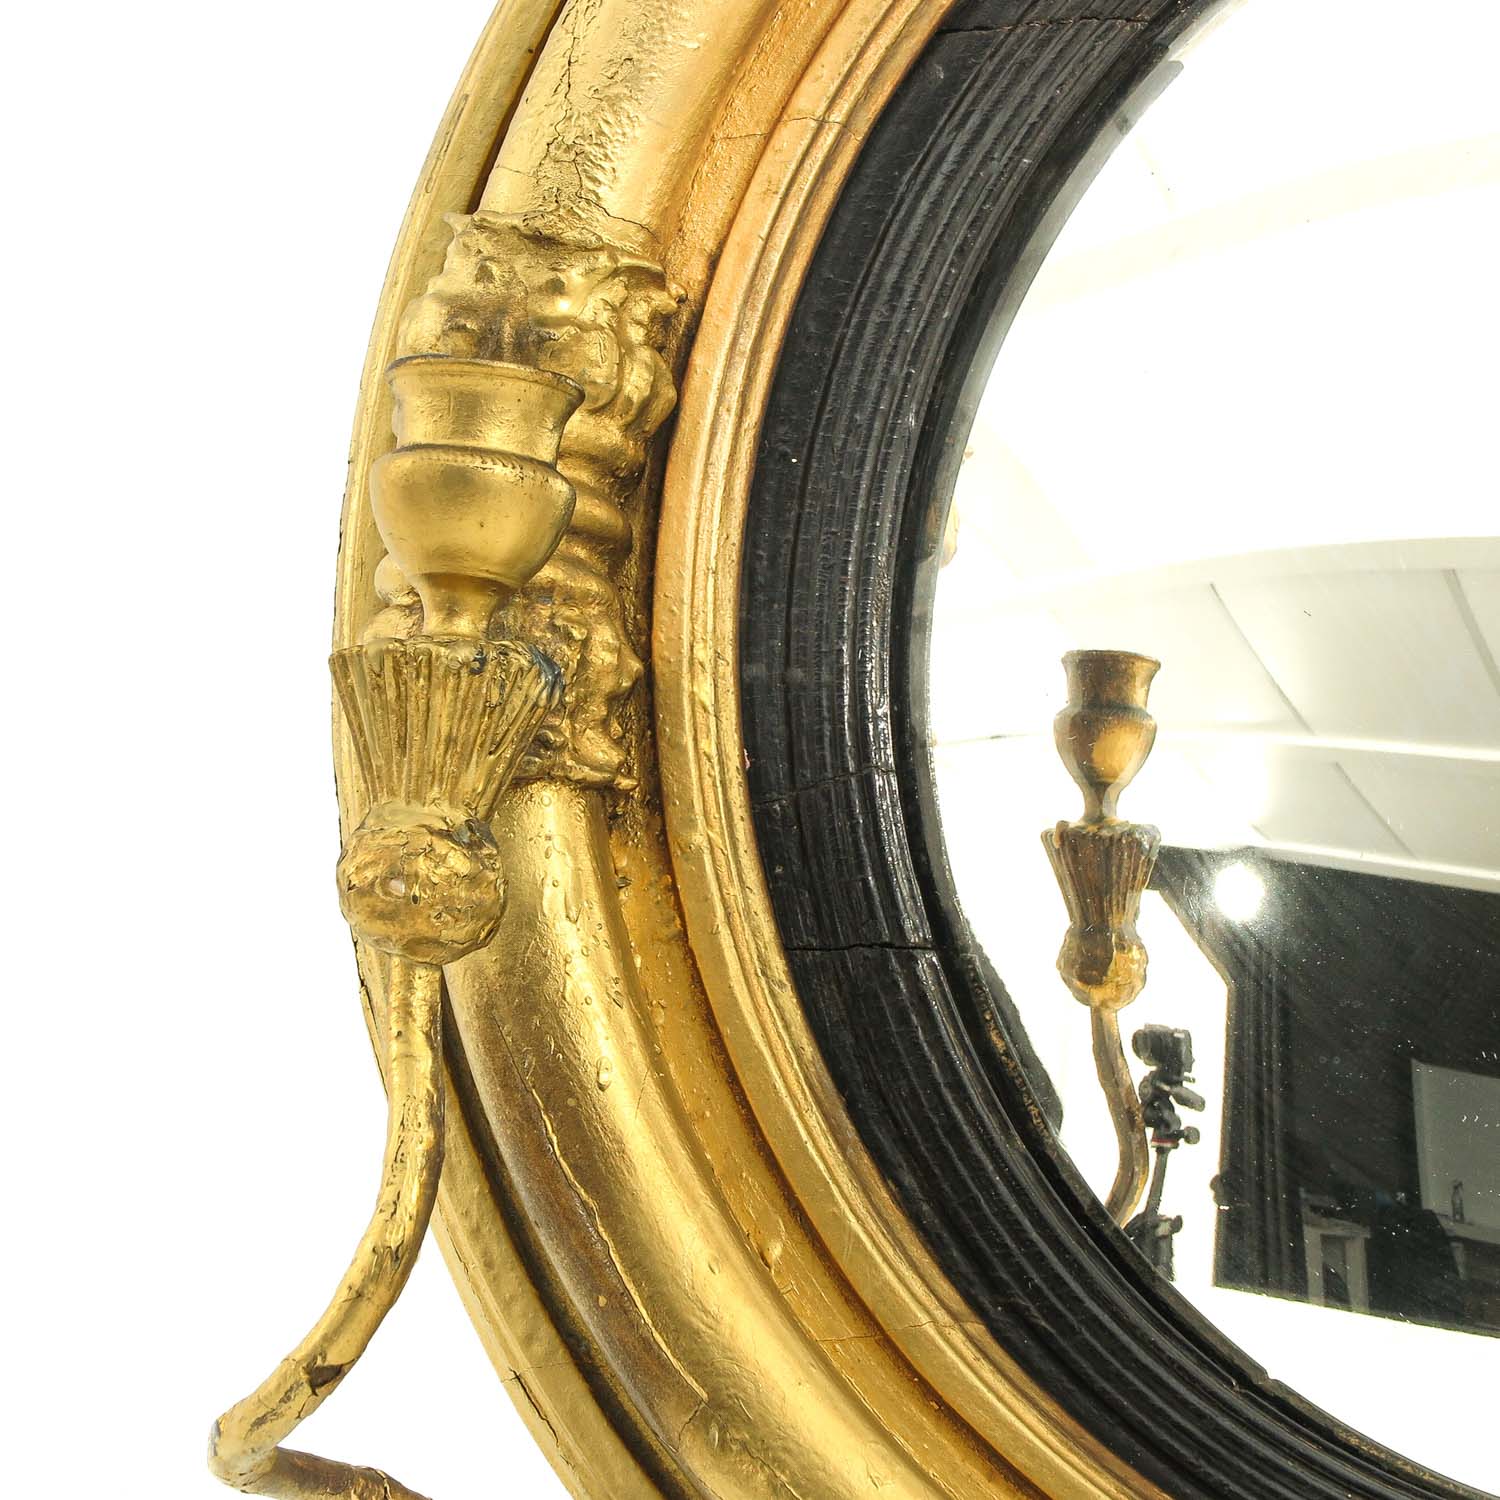 A Gilded Wood Butlers Mirror Circa 1800 - Image 8 of 8